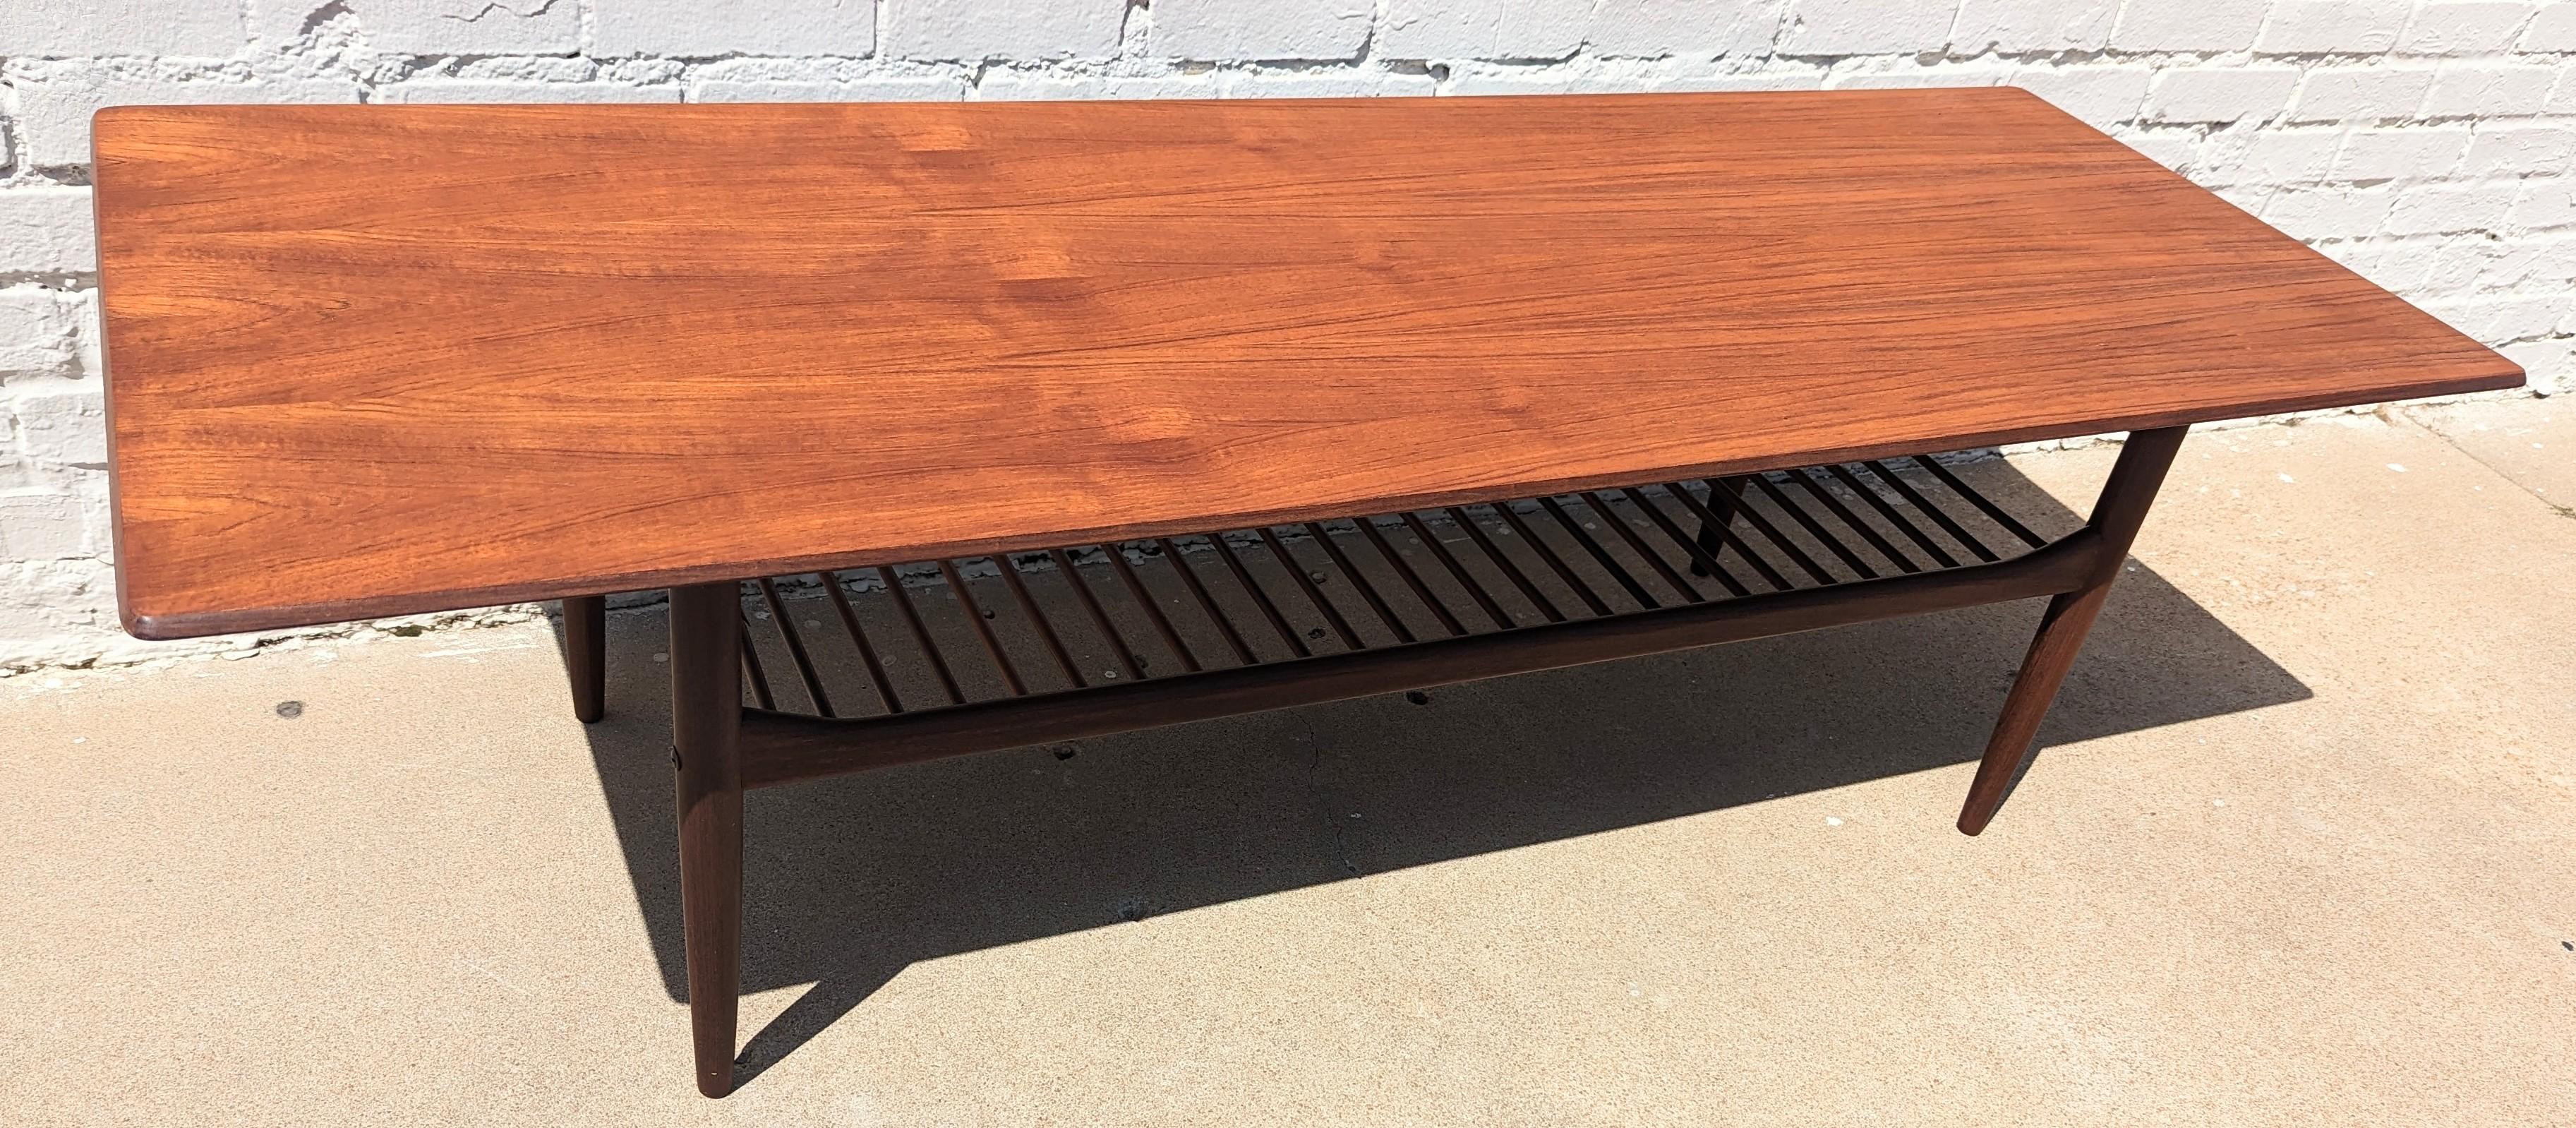 Mid Century English Modern Coffee Table by Kofod Larsen For Sale 1